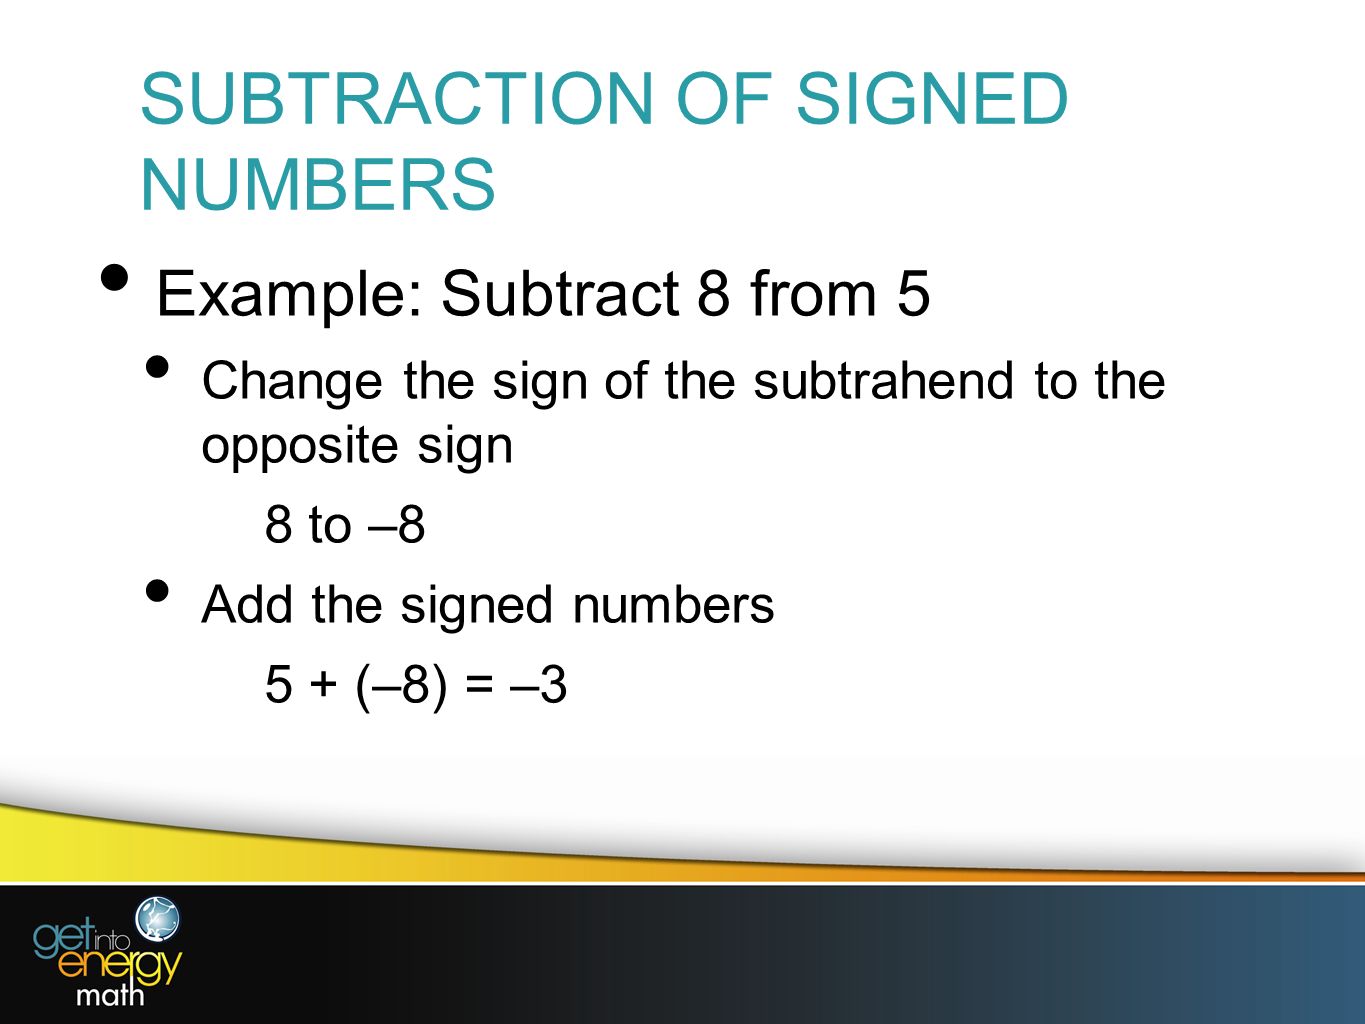 SUBTRACTION OF SIGNED NUMBERS